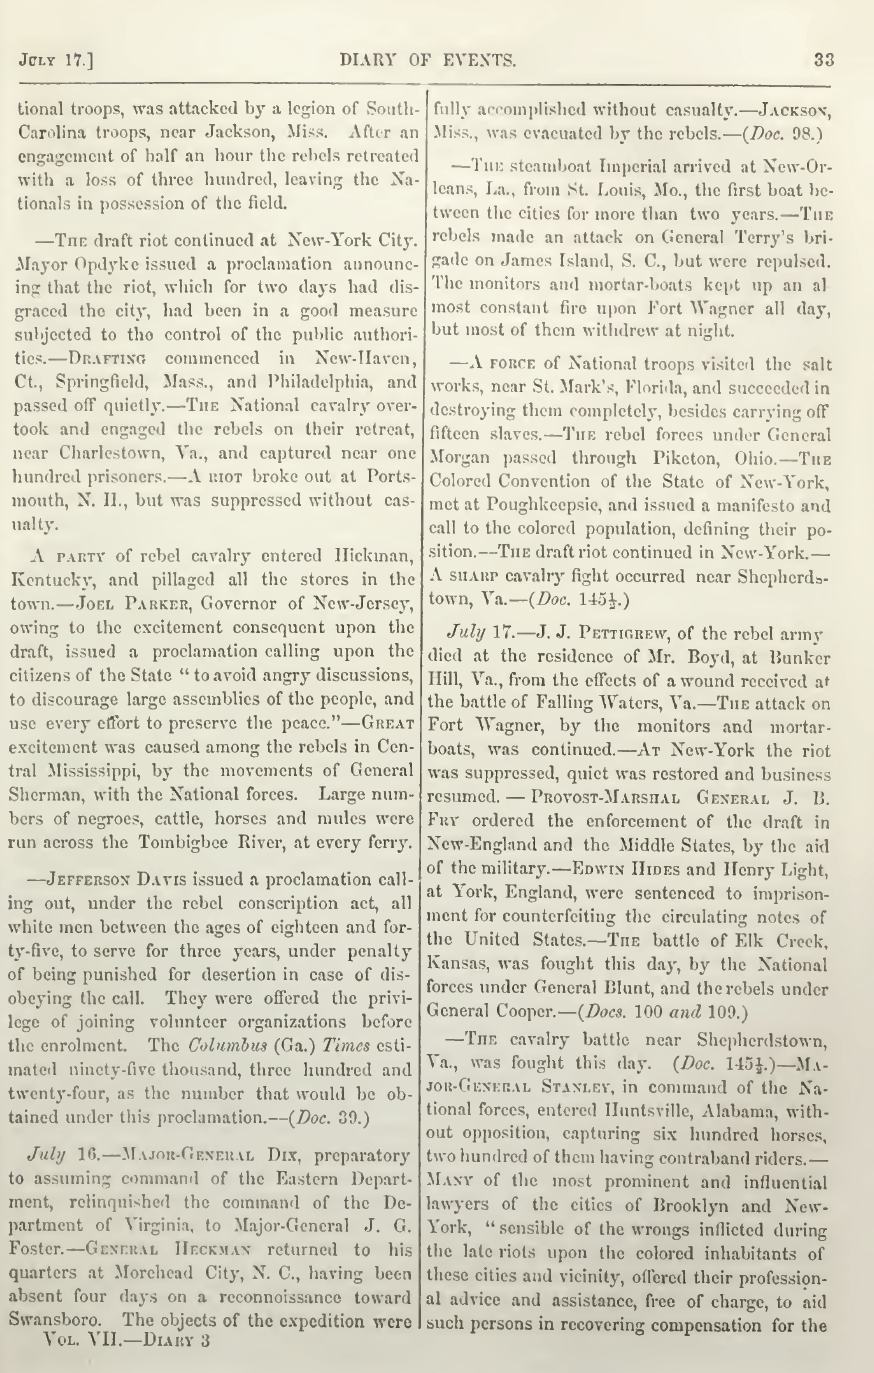 Rebellion Record Diary for July 17, 1863, includes coverage the New York City draft riot